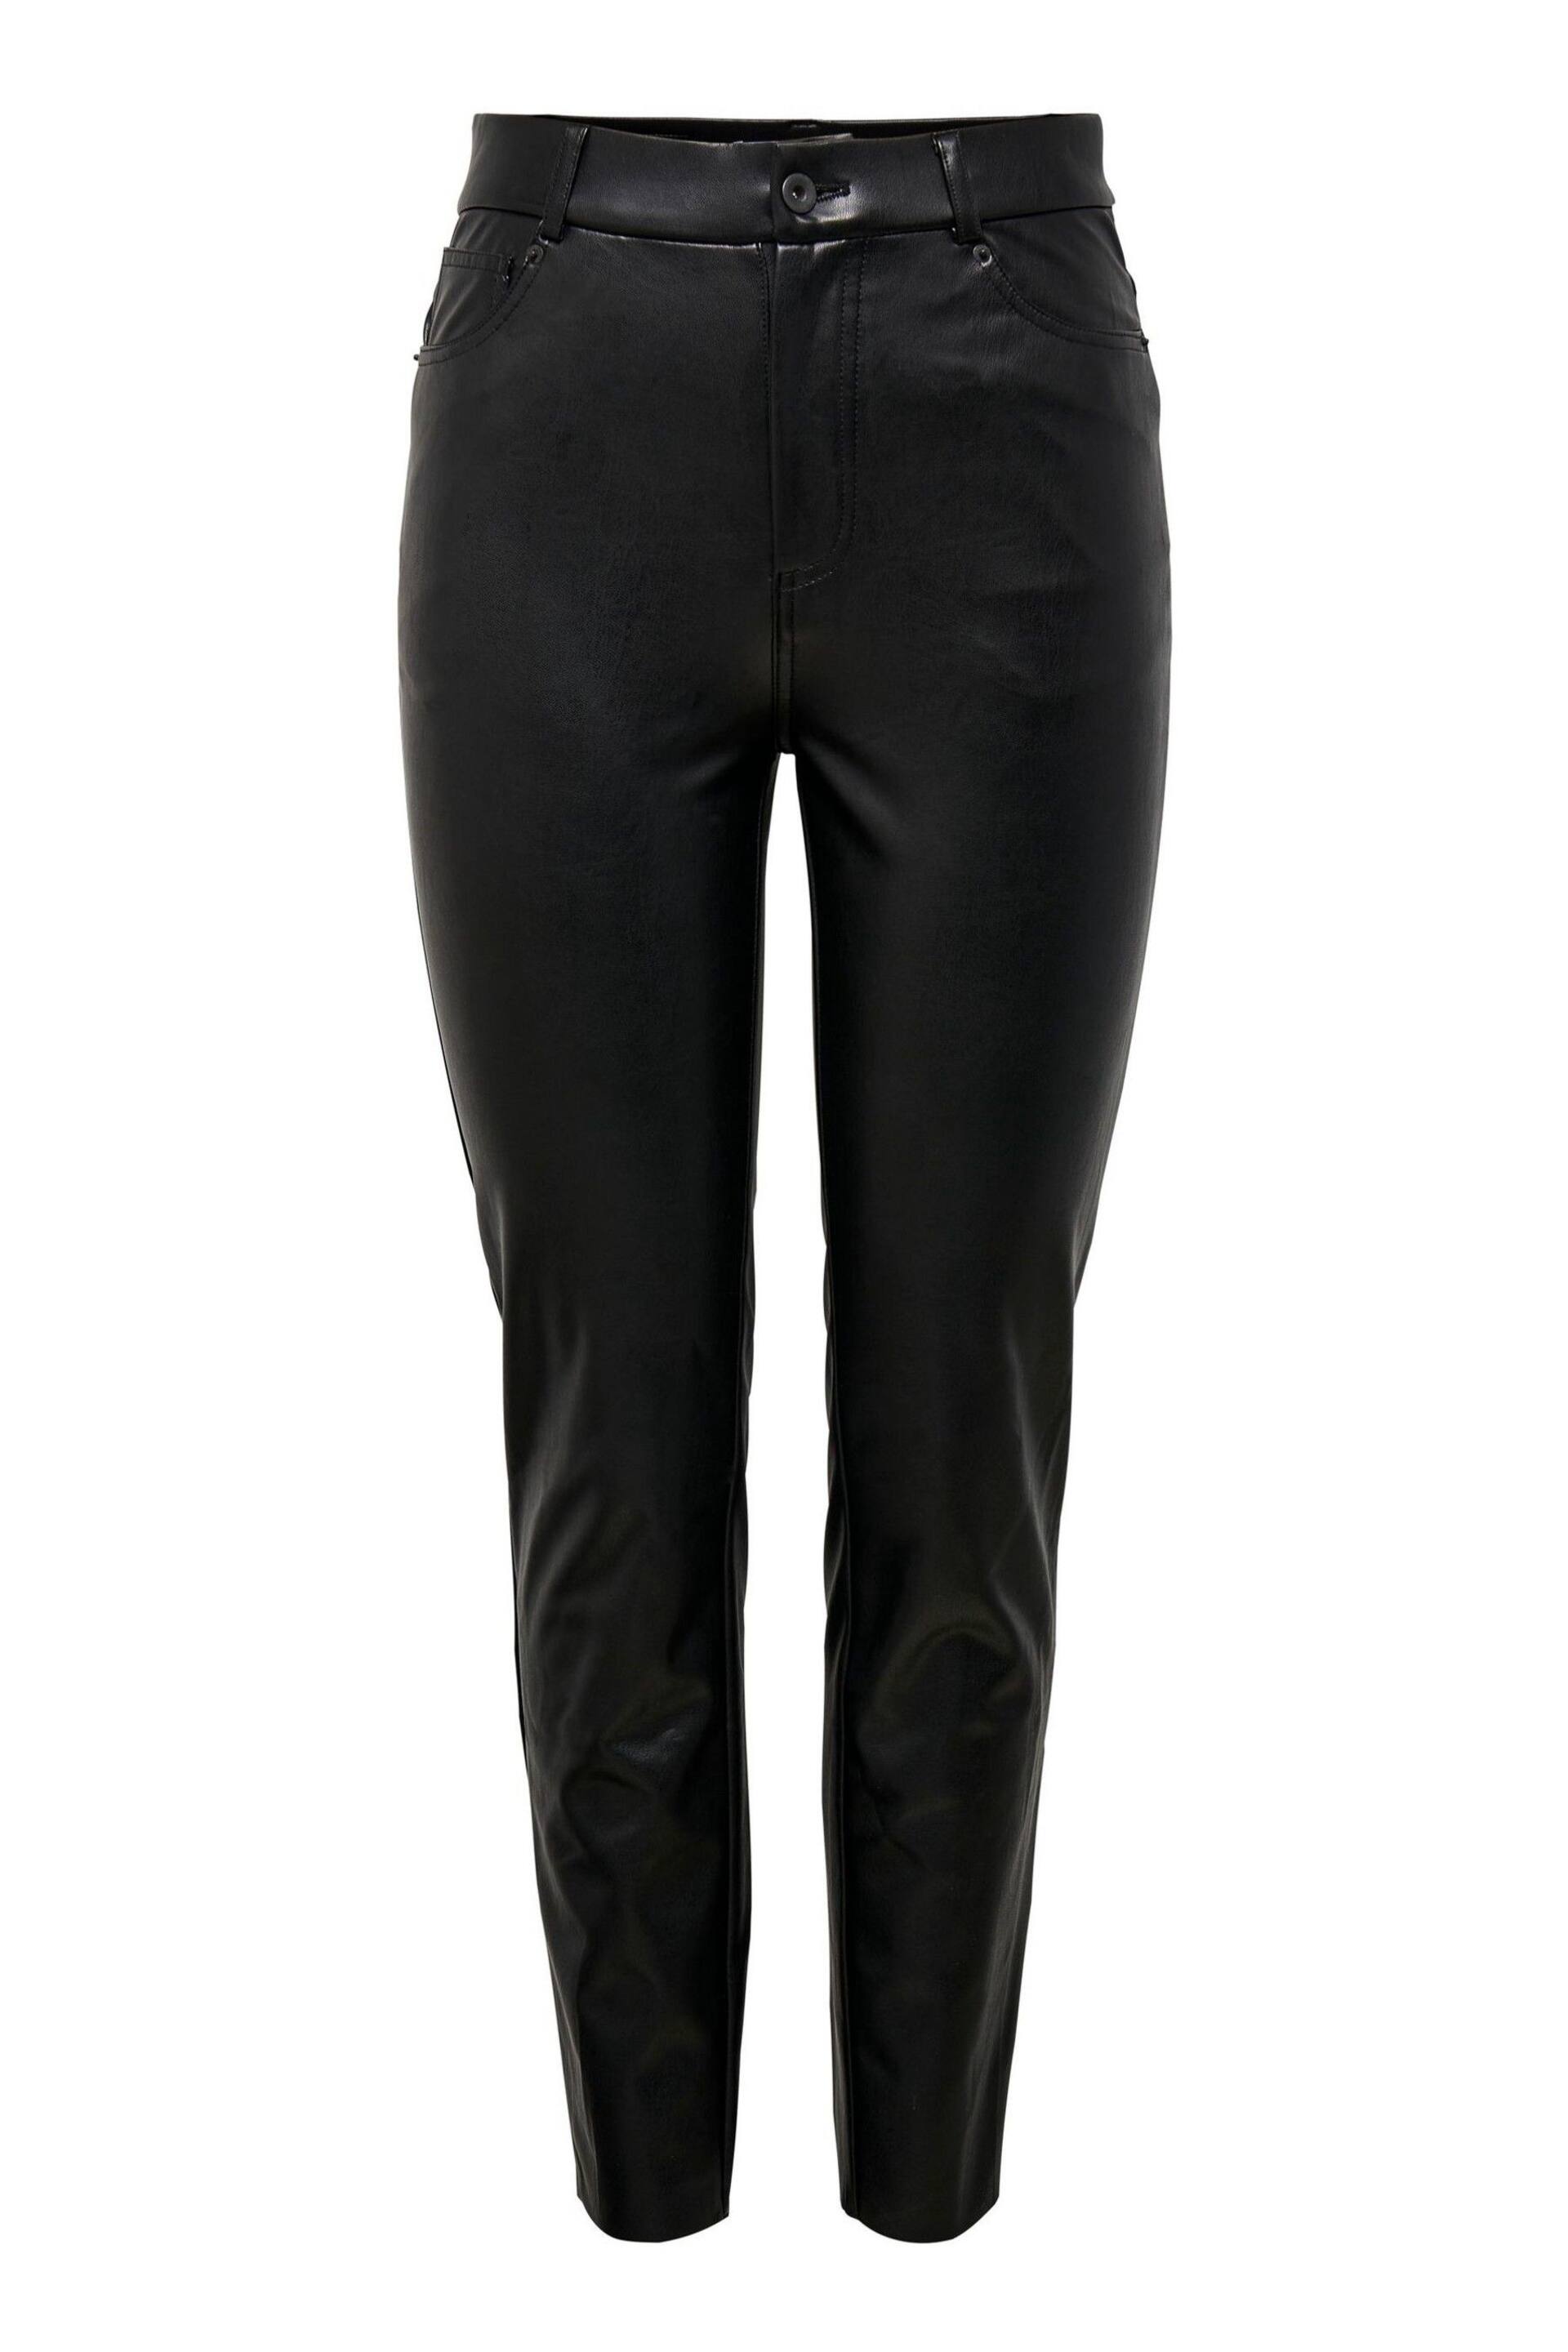 ONLY Black Petite High Waisted Faux Leather Workwear Trousers - Image 5 of 5